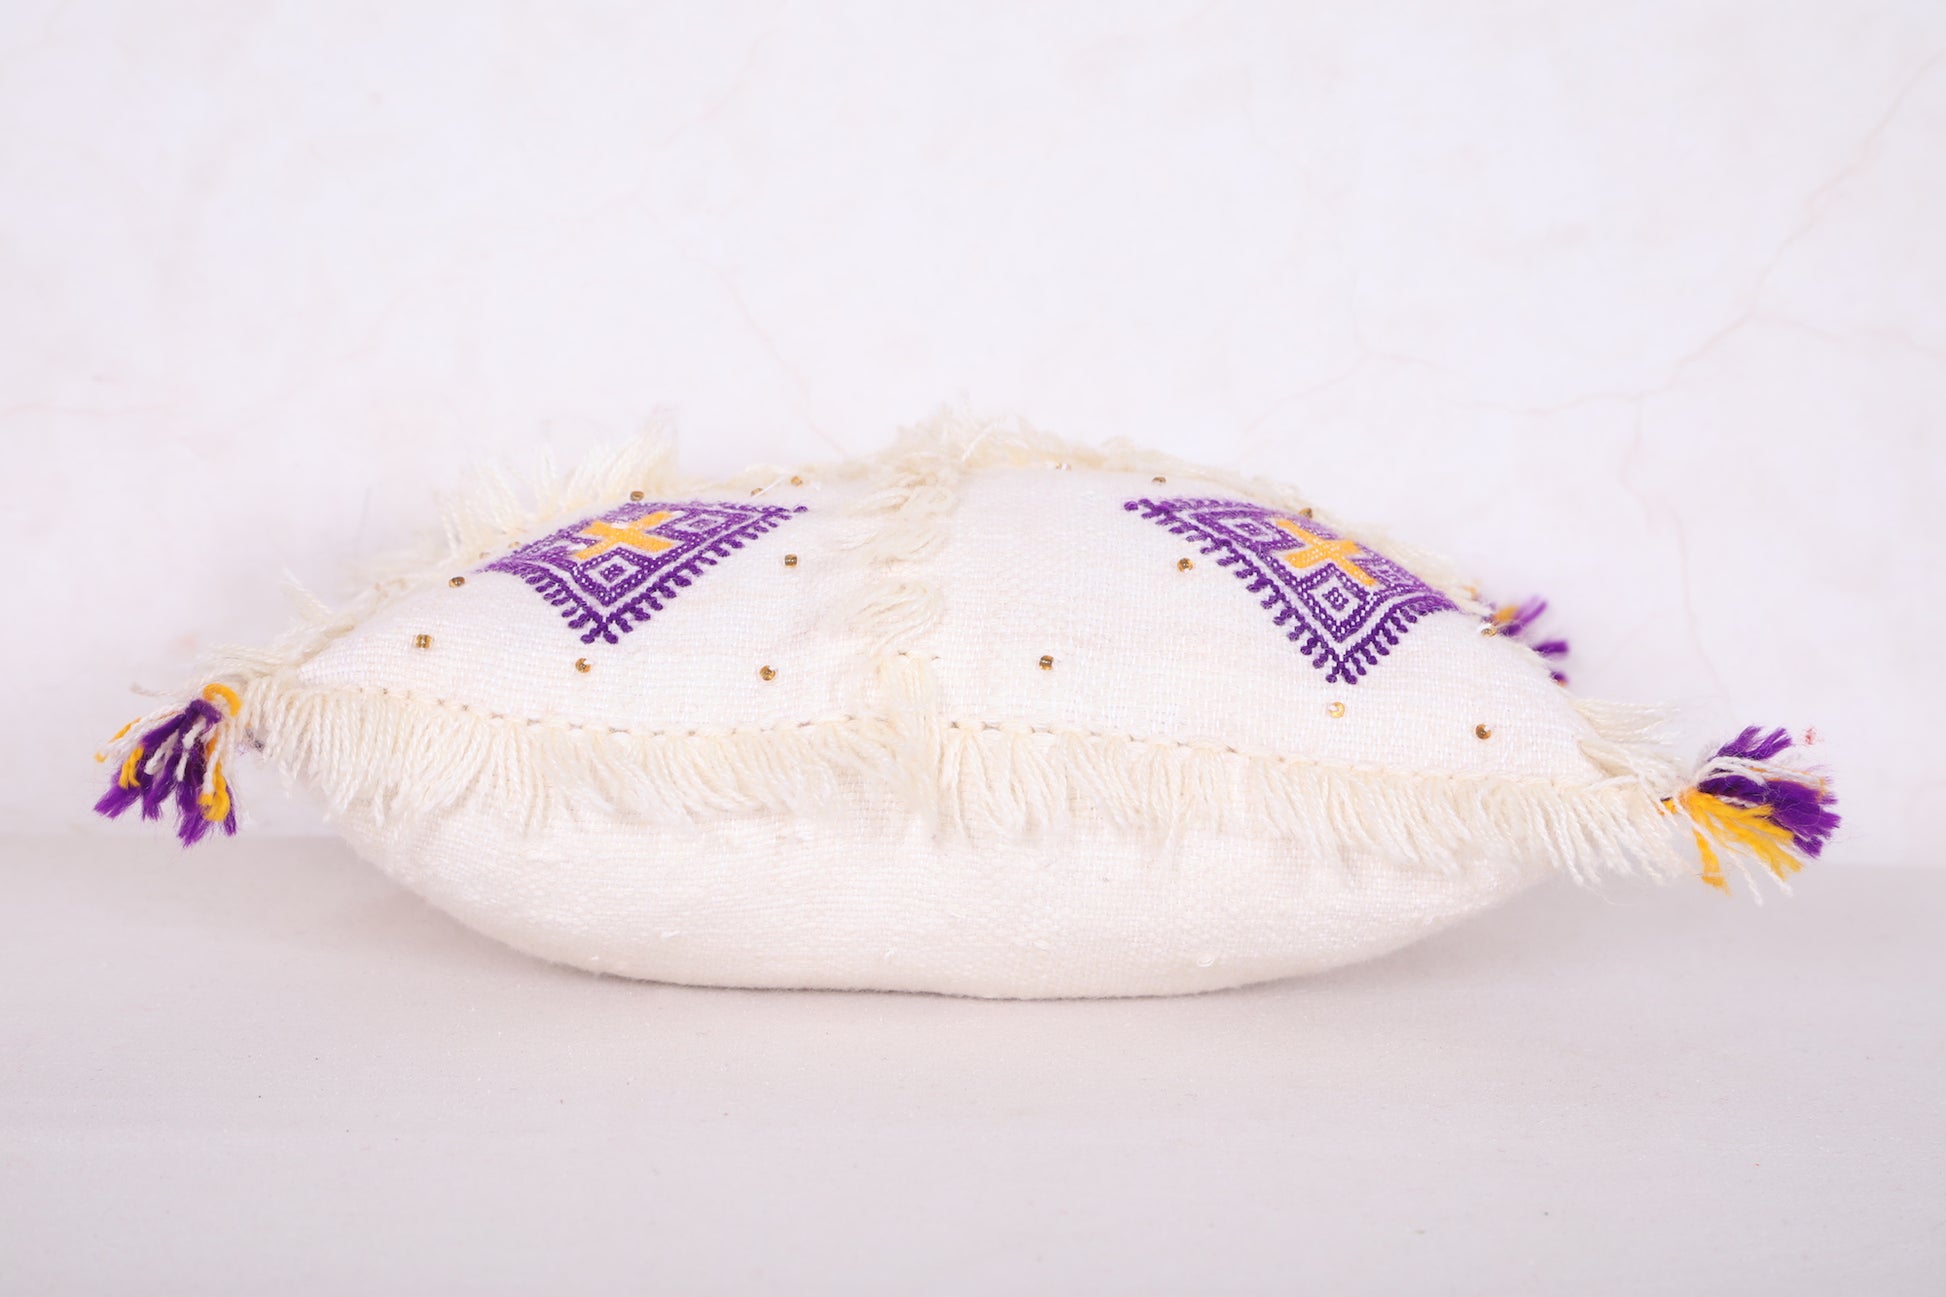 Berber Moroccan pillow 14.9 INCHES X 15.7 INCHES